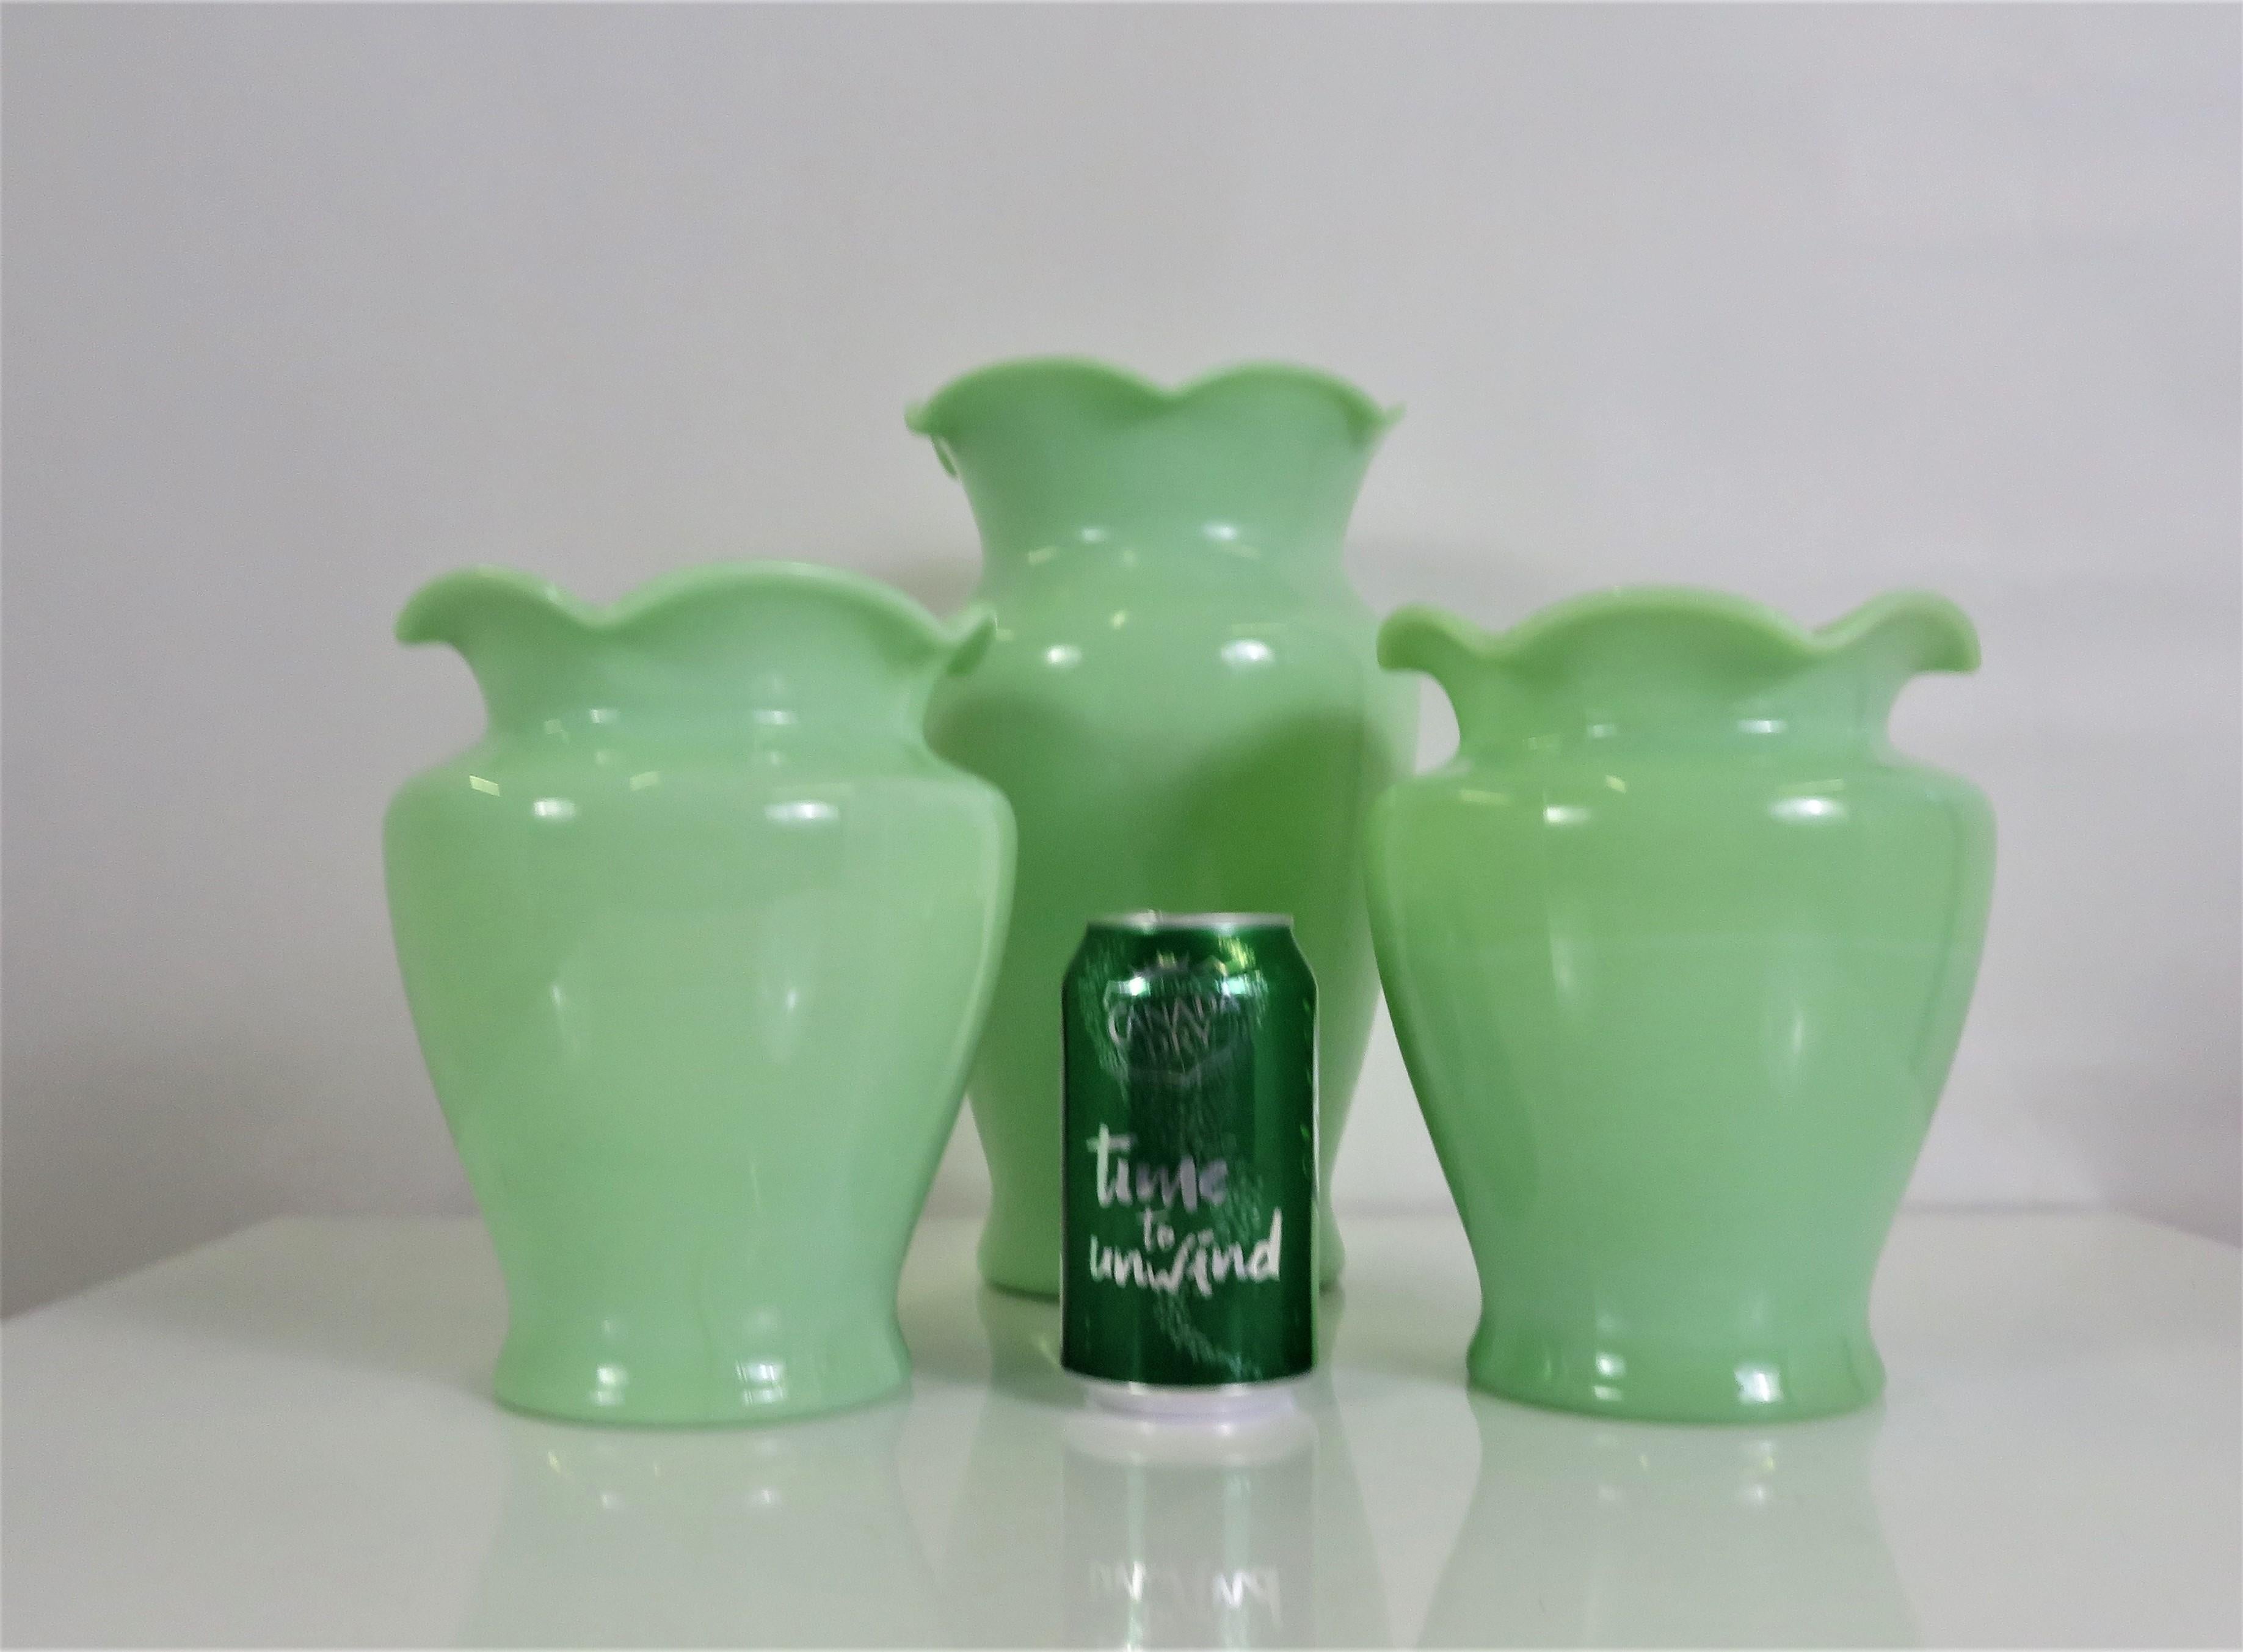 Mid-20th Century Grouping of 3 Jadite Green Mid-Century Modern Sarah Vases by McKee Glass 1940s